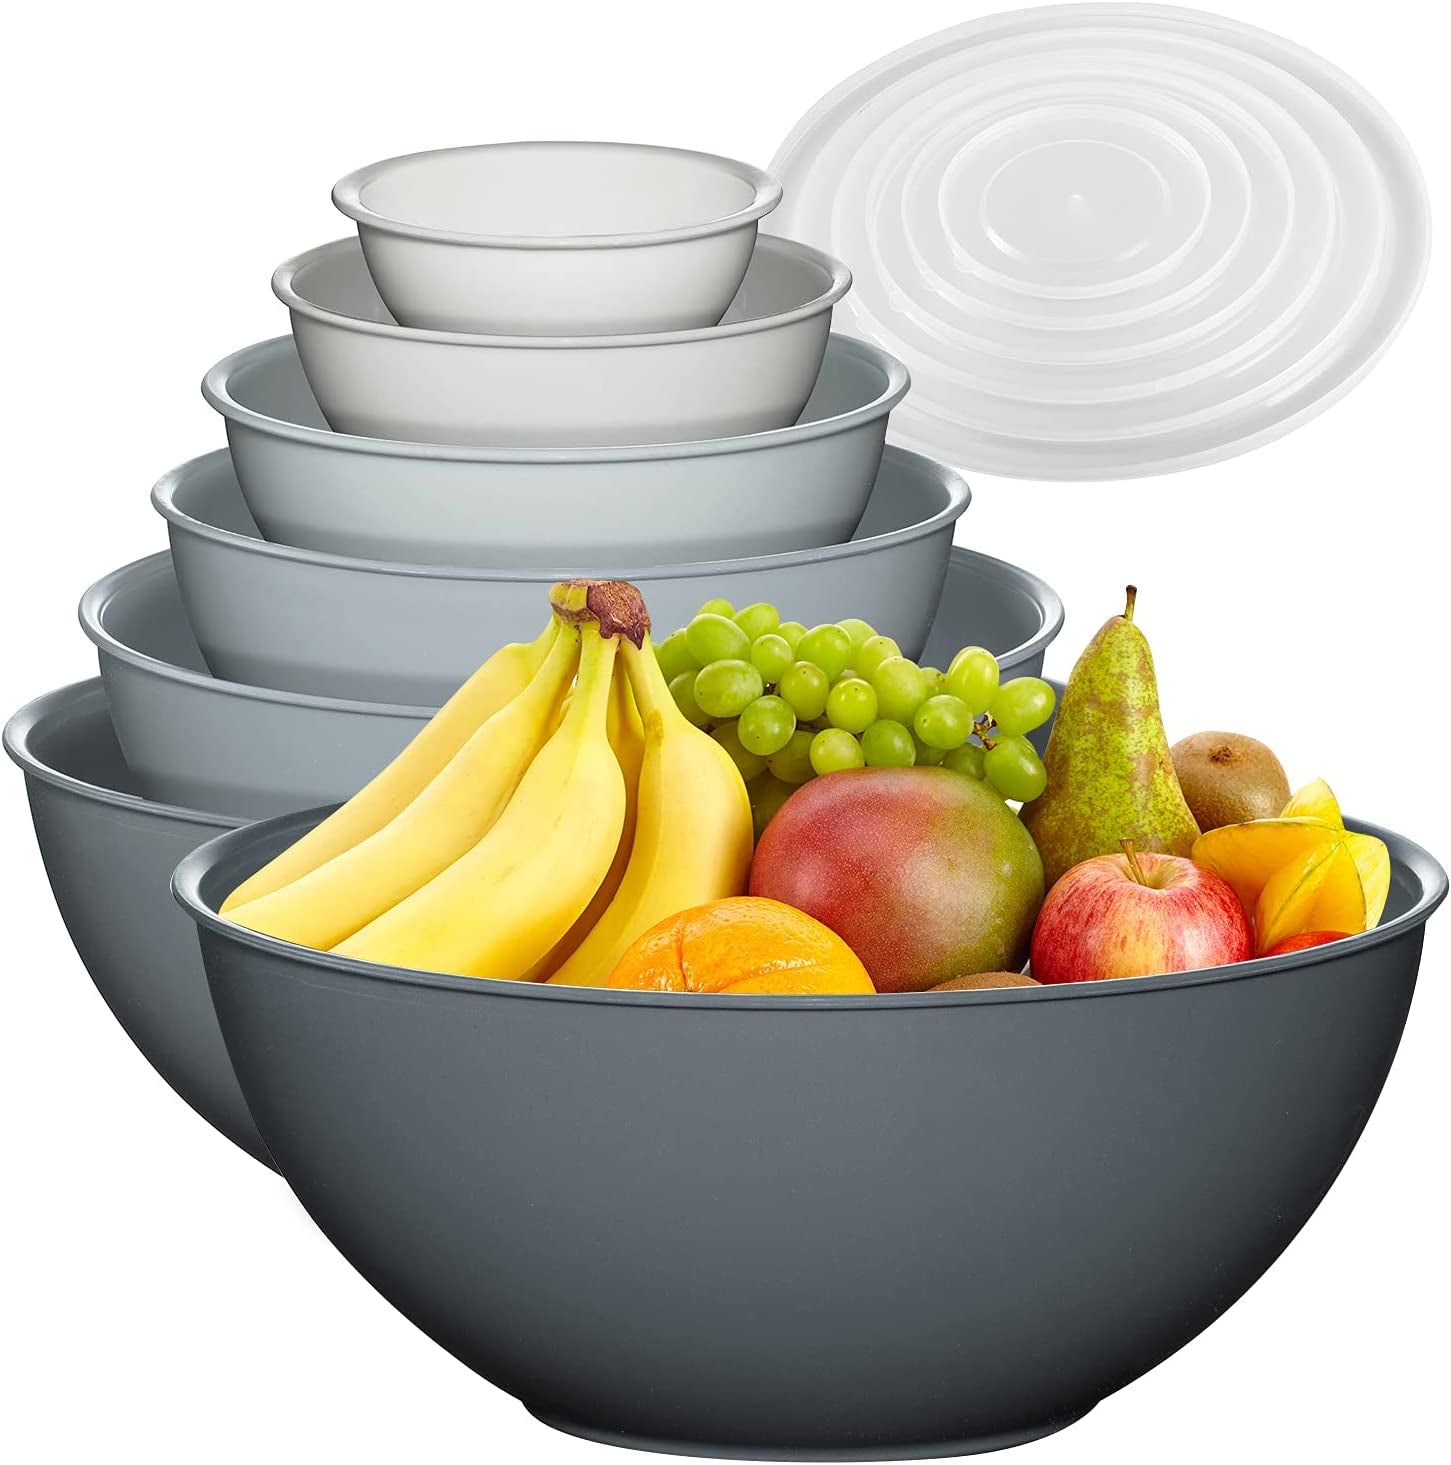 12 Piece Plastic Mixing Bowls Set, Colorful Nesting Bowls with Lids, 6 Prep Bowls and 6 Lids - Color Food Storage for Leftovers, Fruit, Salads, Snacks, and Potluck Dishes - Microwave and Freezer Safe